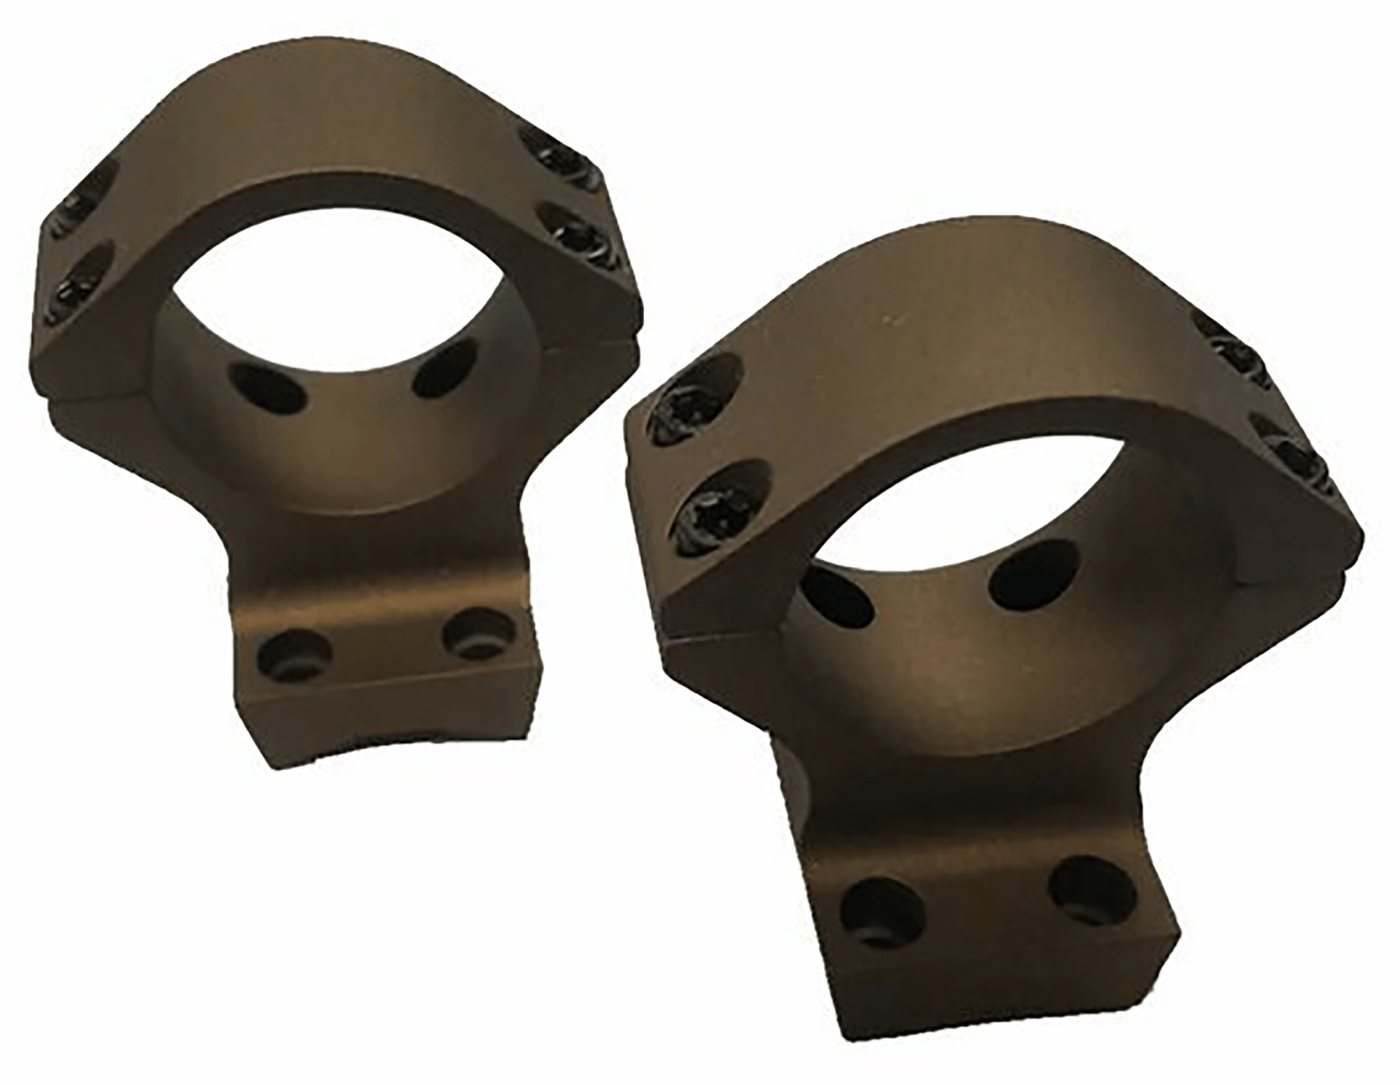 Talley Manufacturing Talley Rings Med 1" Browning - X-bolt Hells Canyon Bronze Scope Mounts And Rings